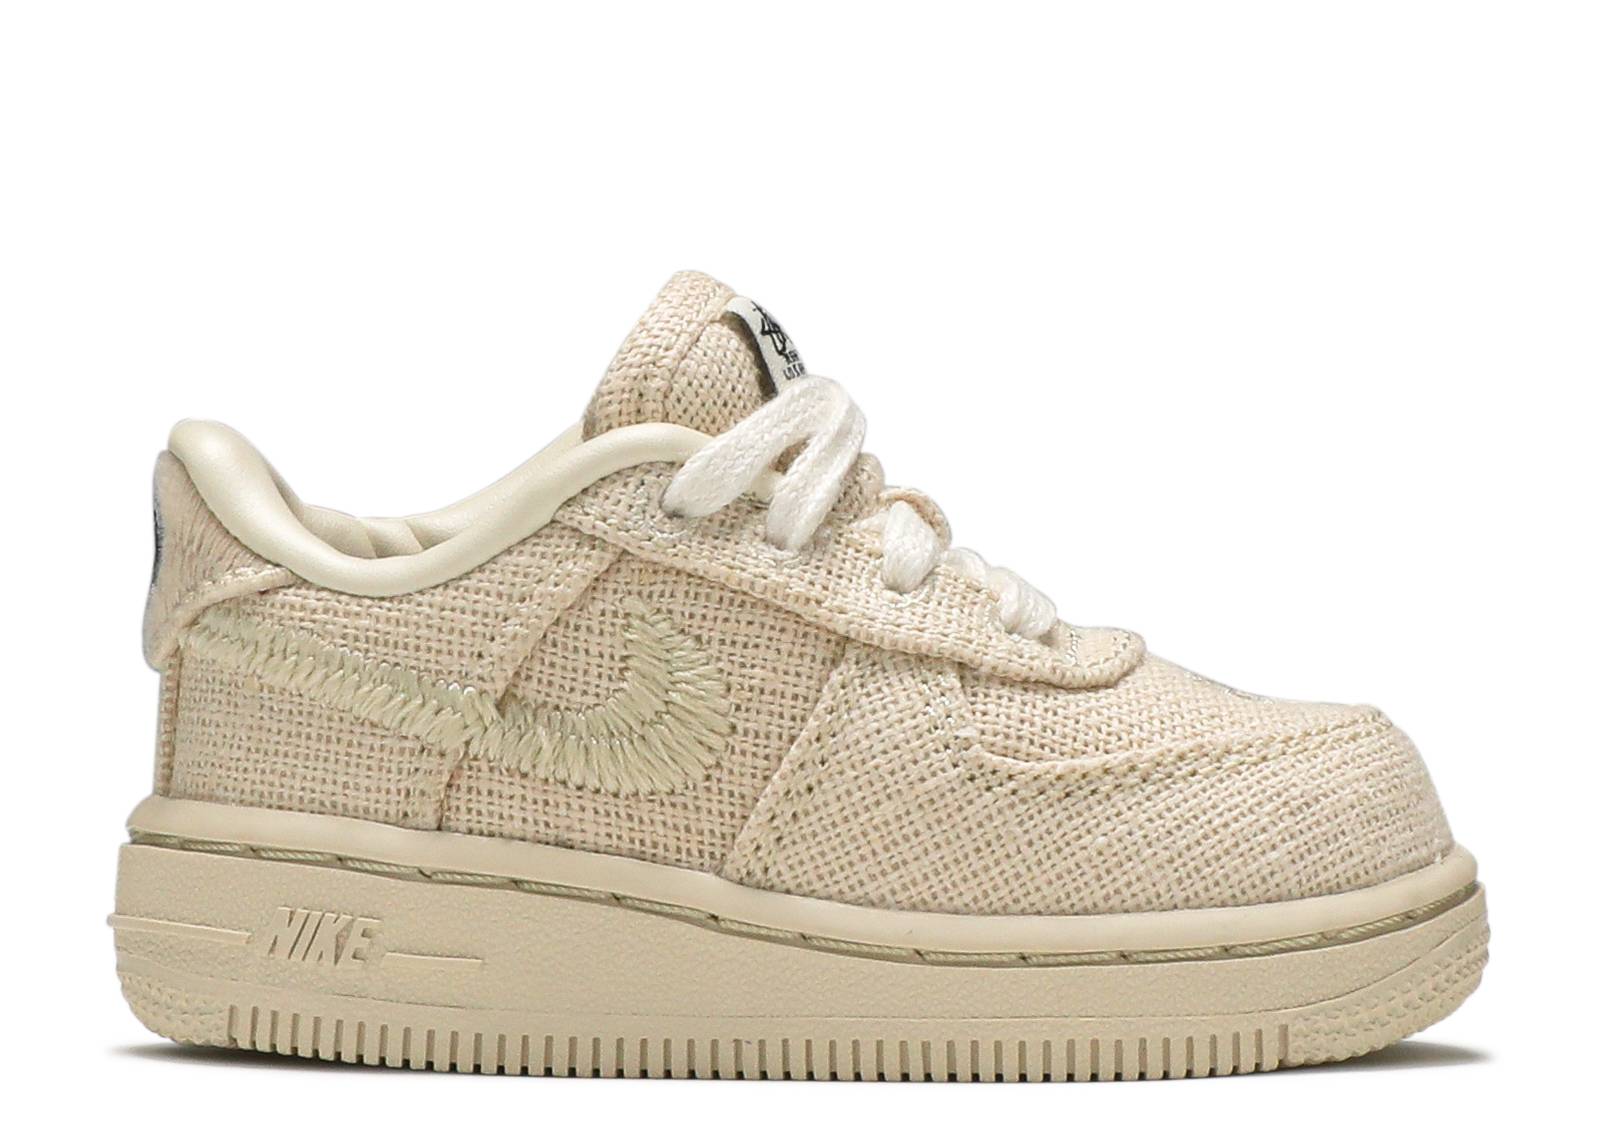 Stussy x Air Force 1 Low TD 'Fossil'